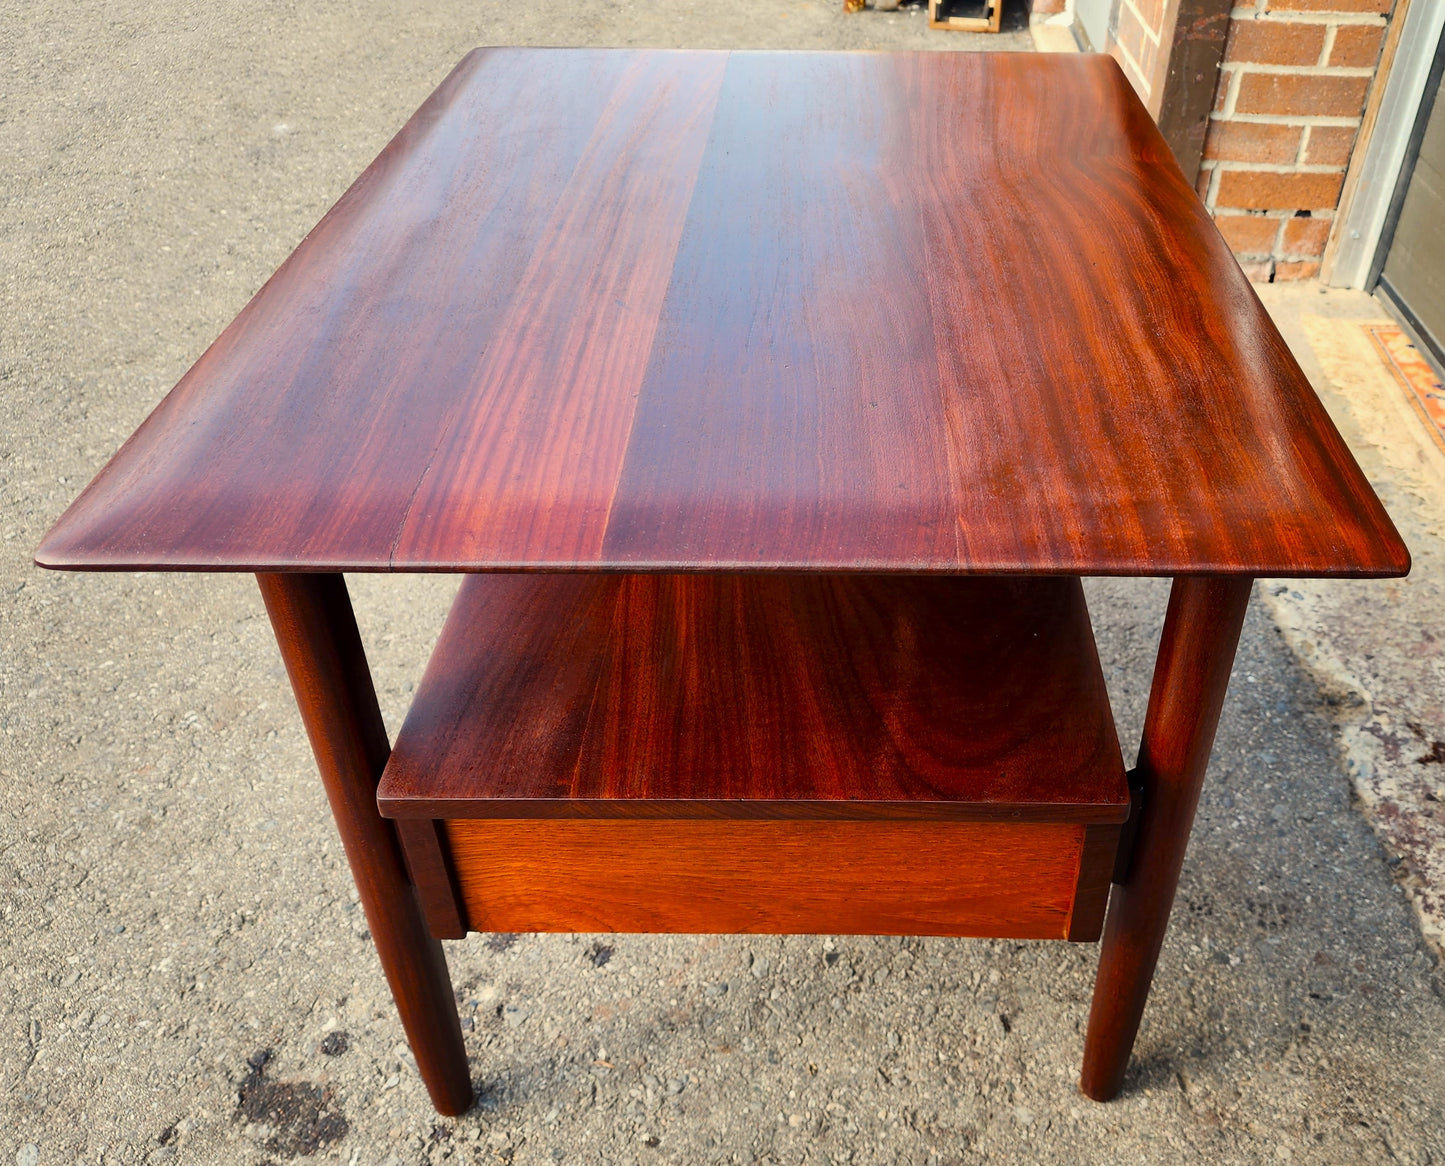 REFINISHED Mid Century Modern Solid Teak Side Tables w Drawers or Nightstands by Imperial (2 available)